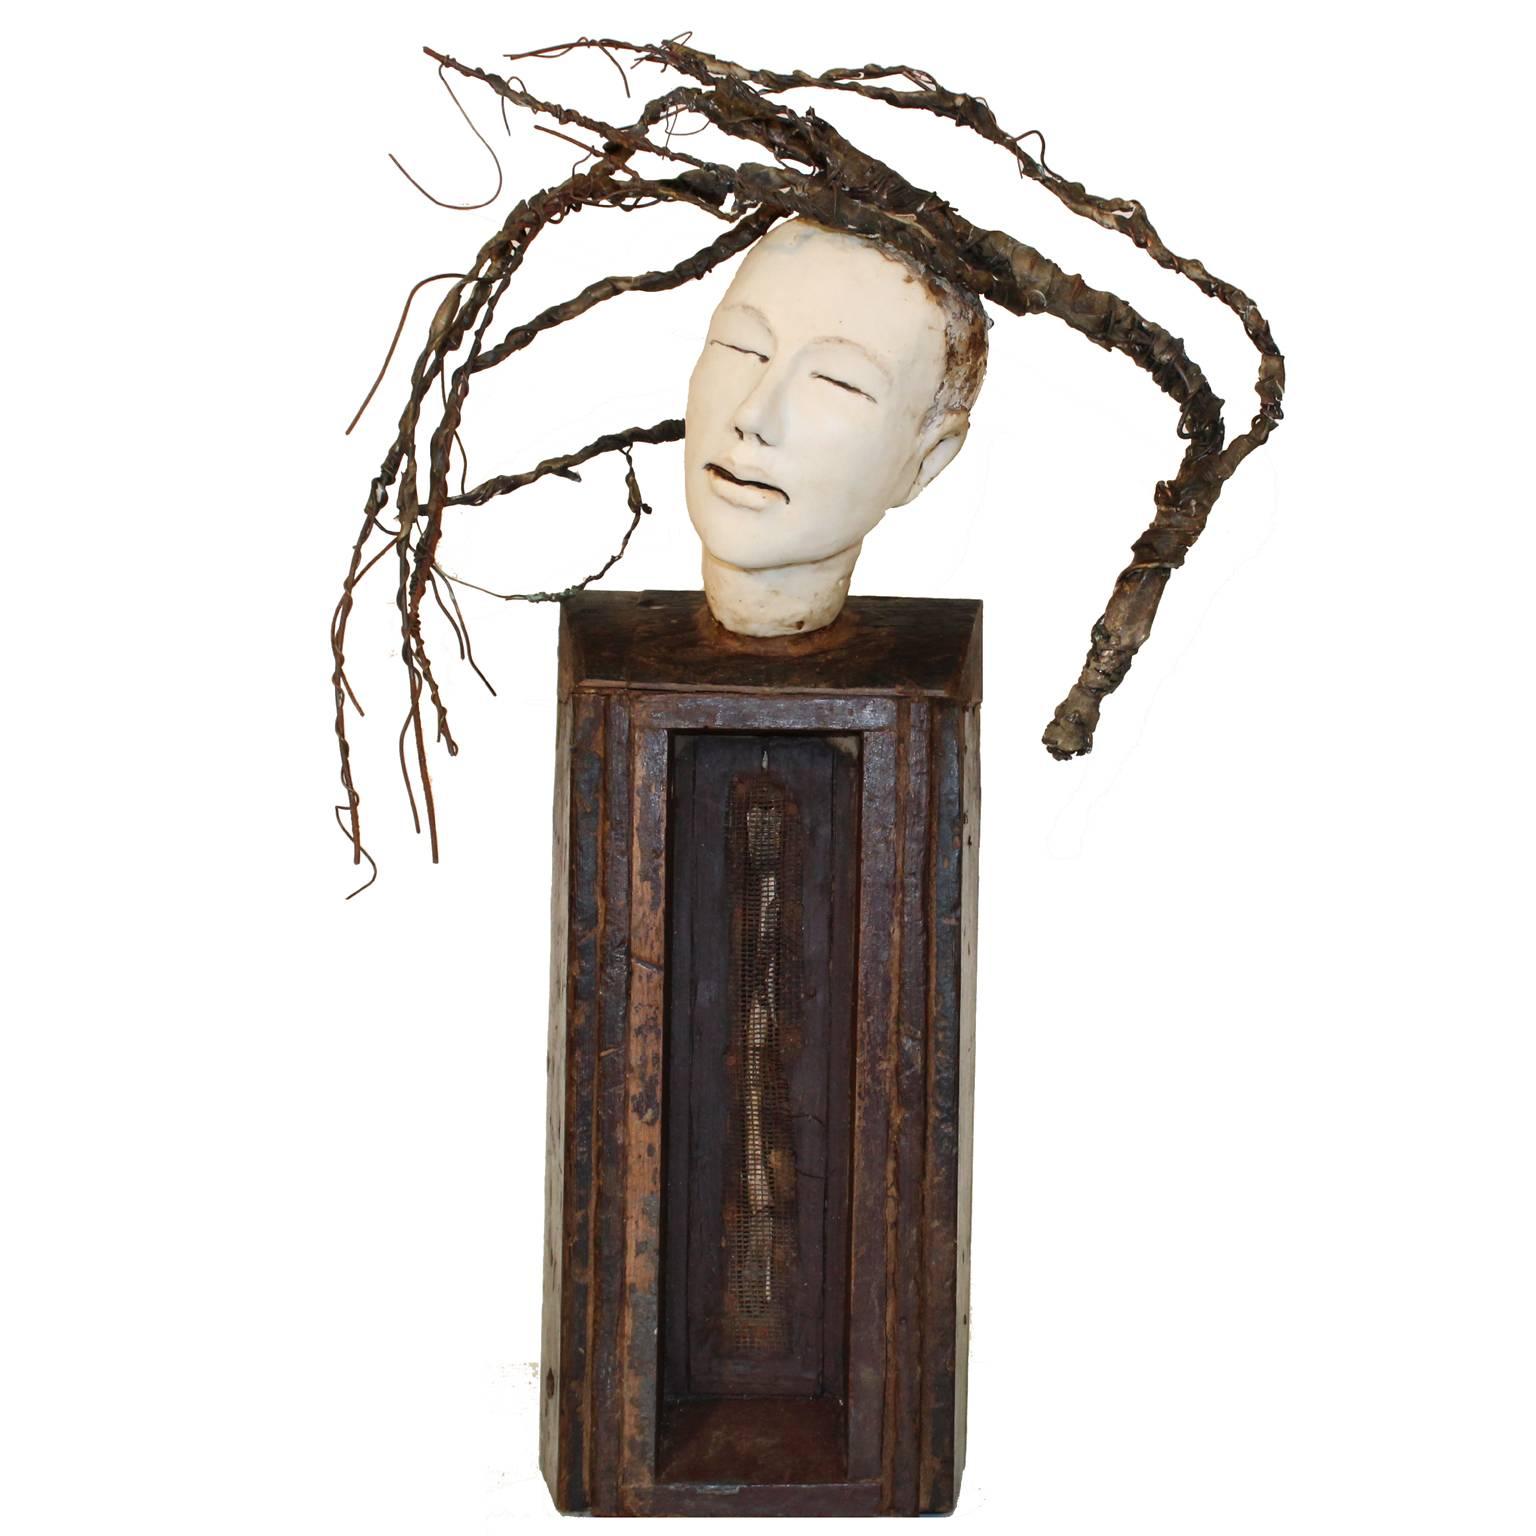 Mixed-Media Sculpture by Cathy Rose